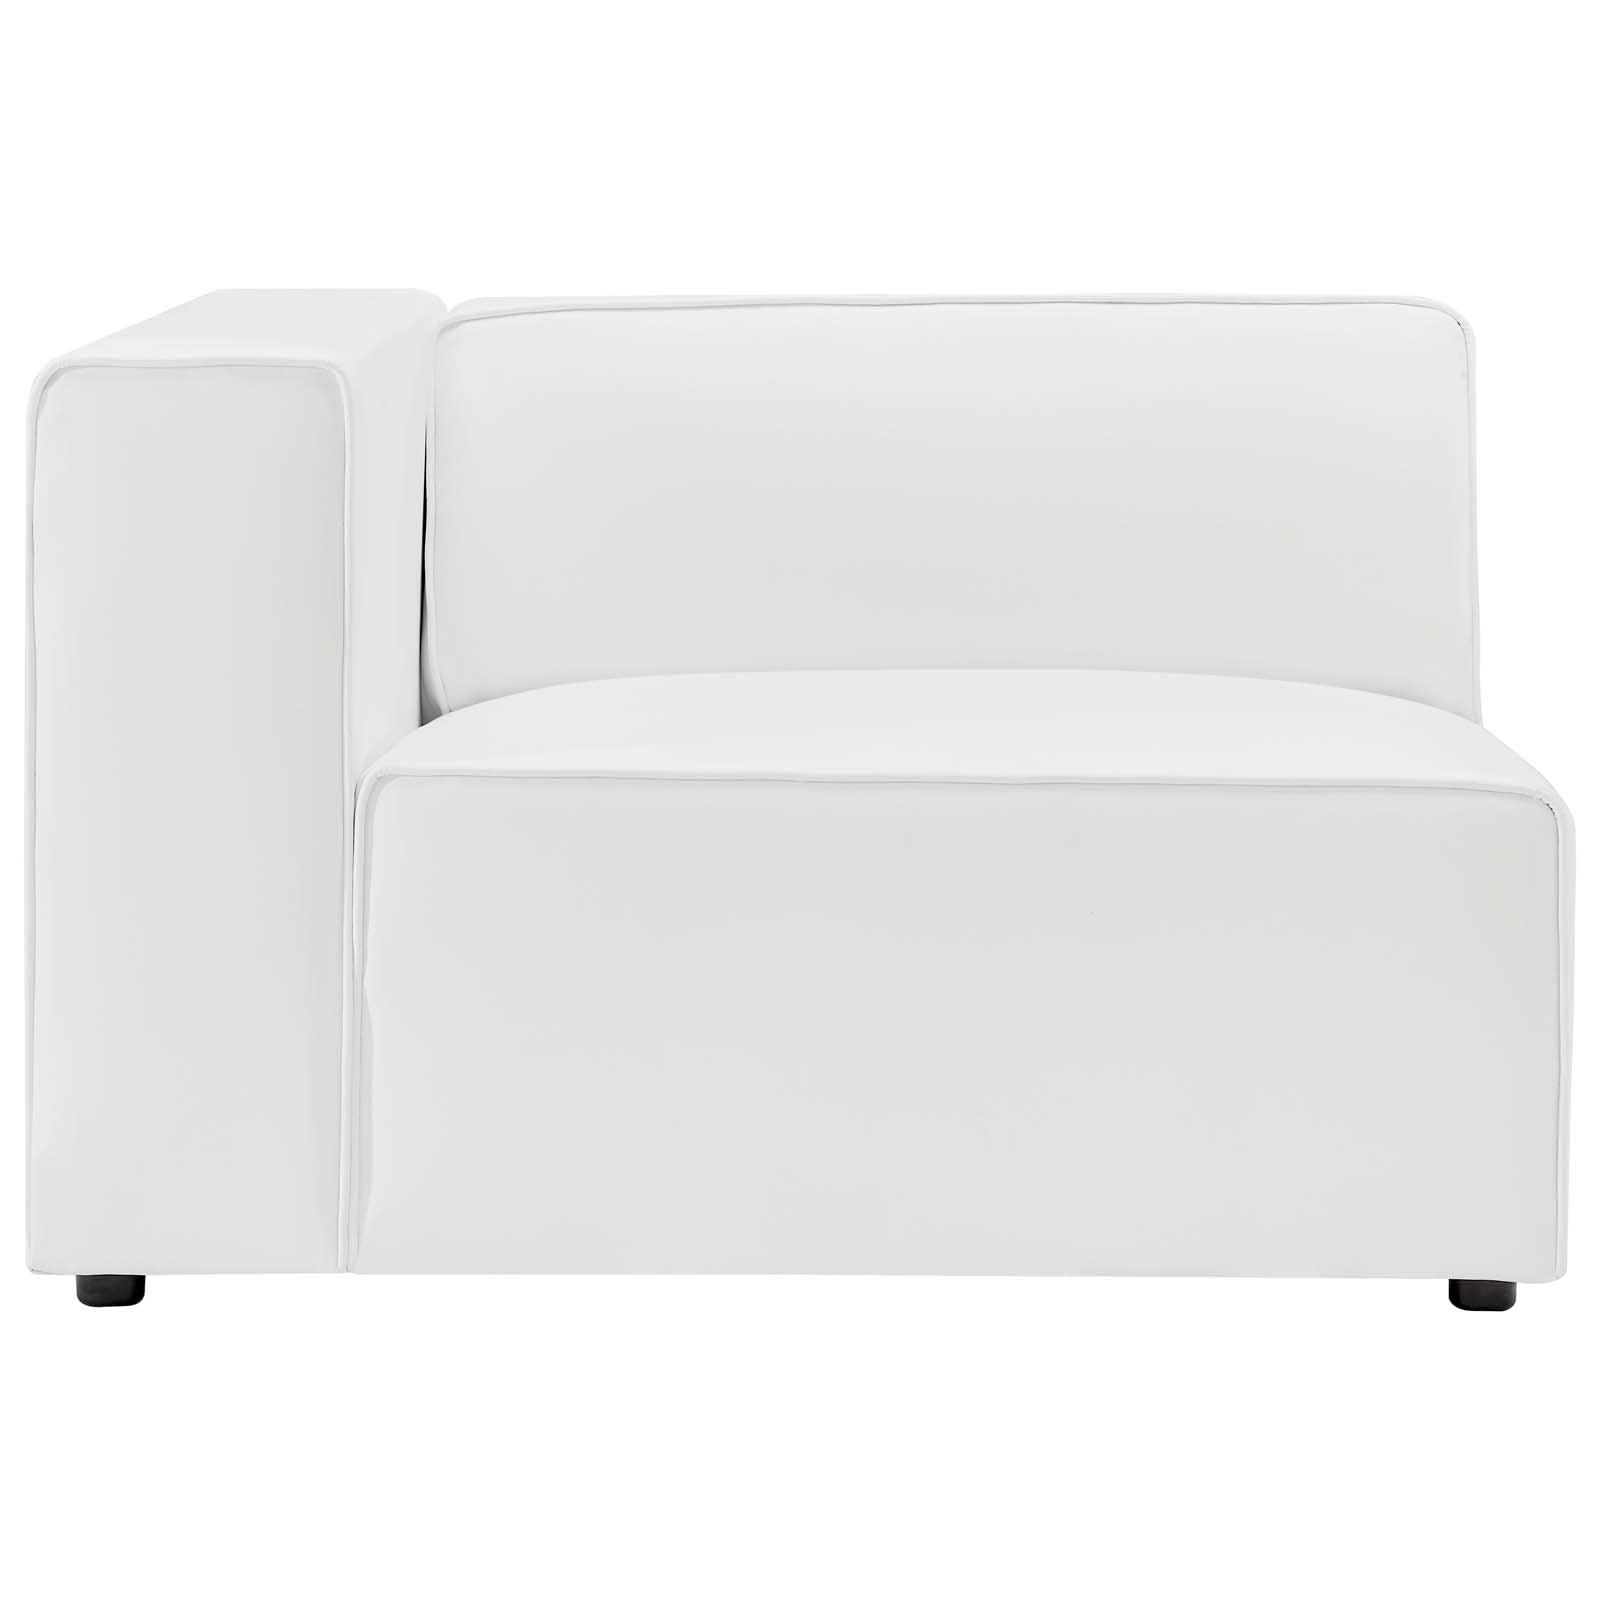 Modway Accent Chairs - Mingle Vegan Leather Left Arm Chair White